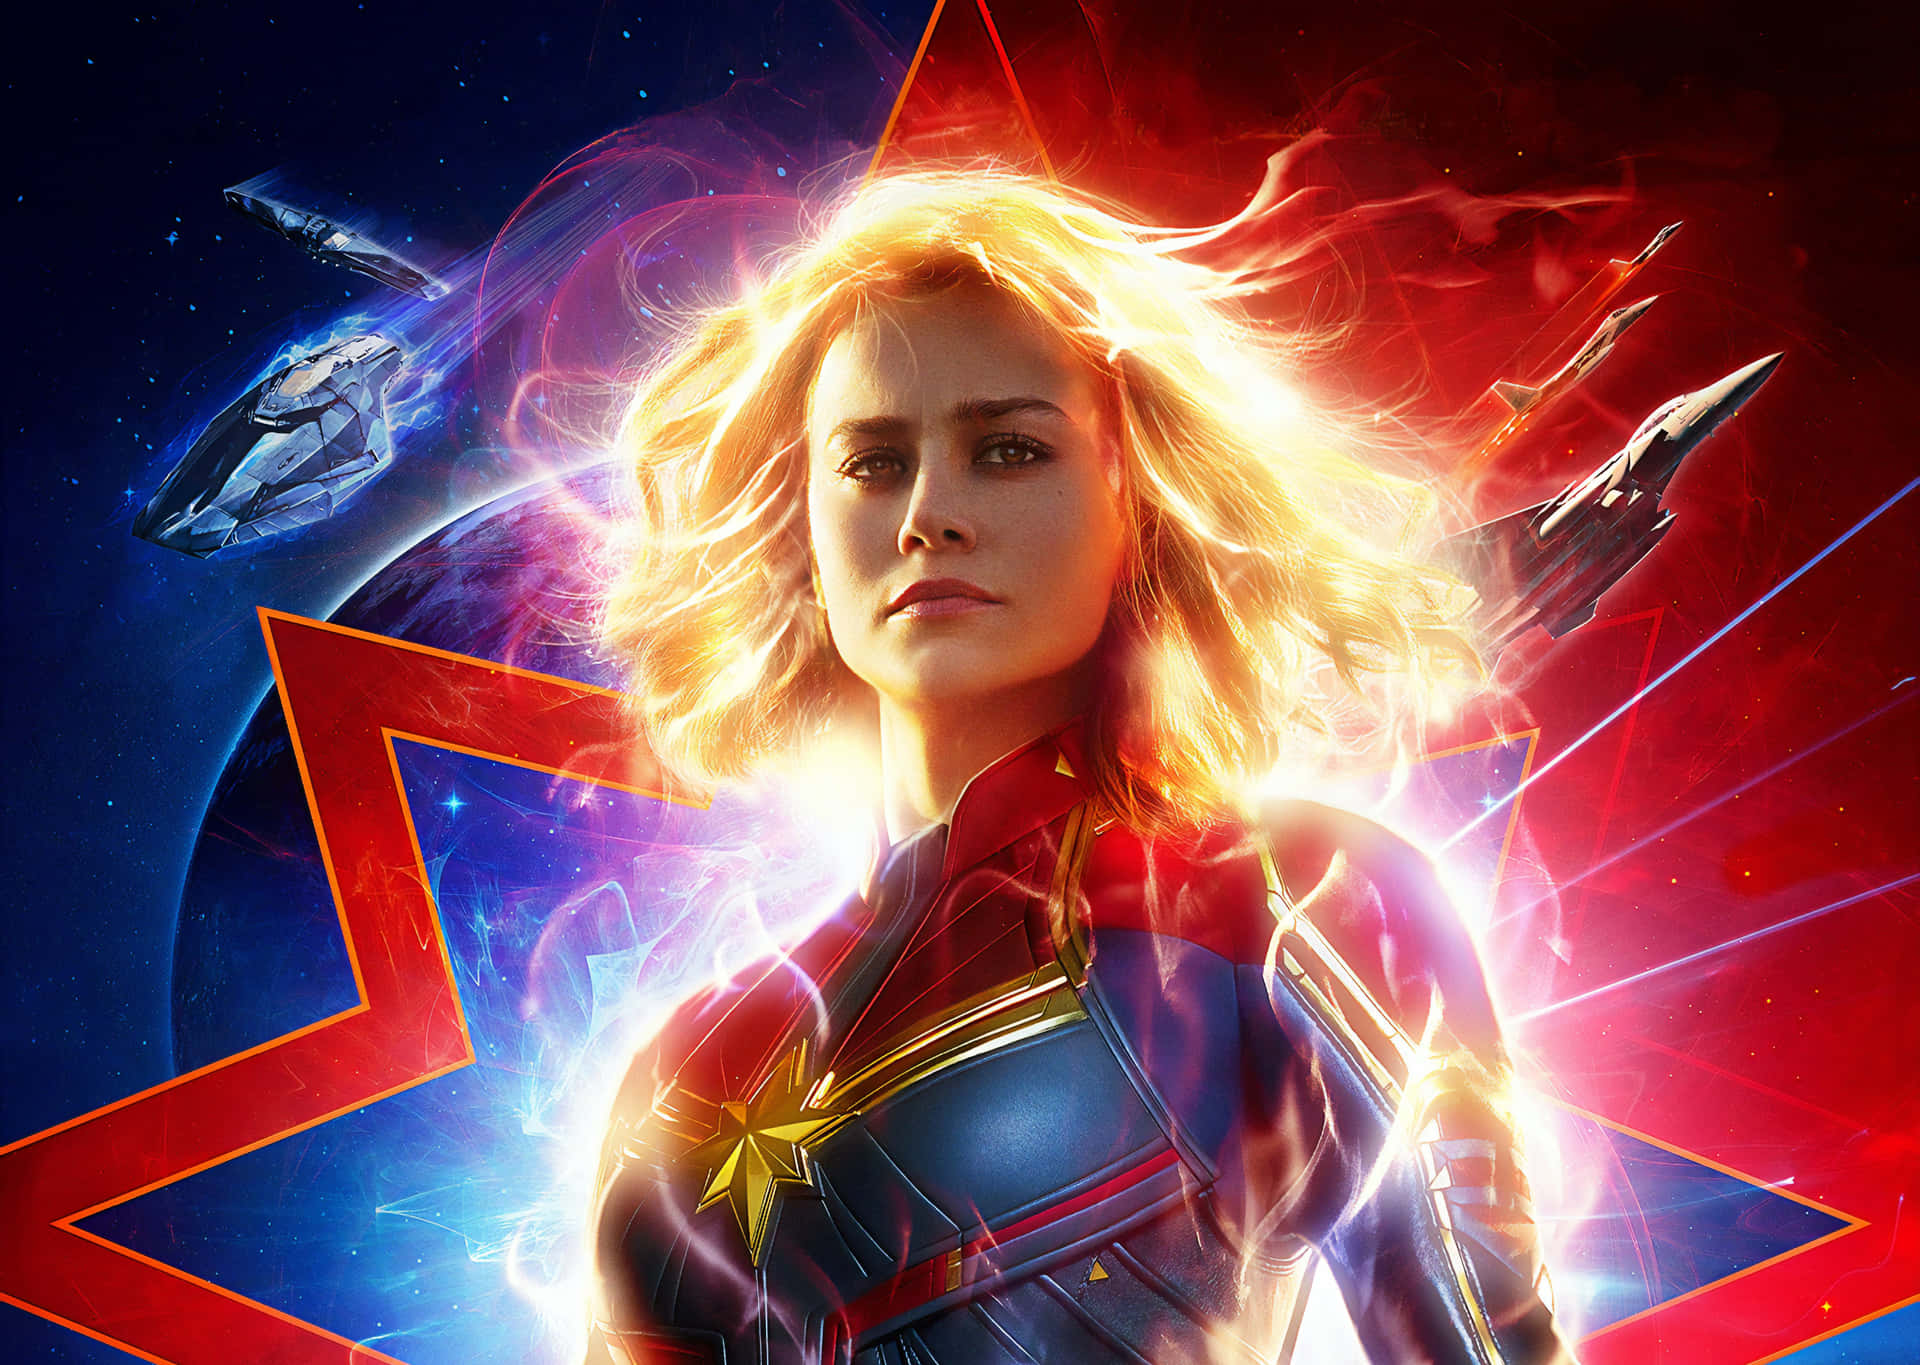 The fierce and heroic Captain Marvel soars in this 3D wallpaper! Wallpaper